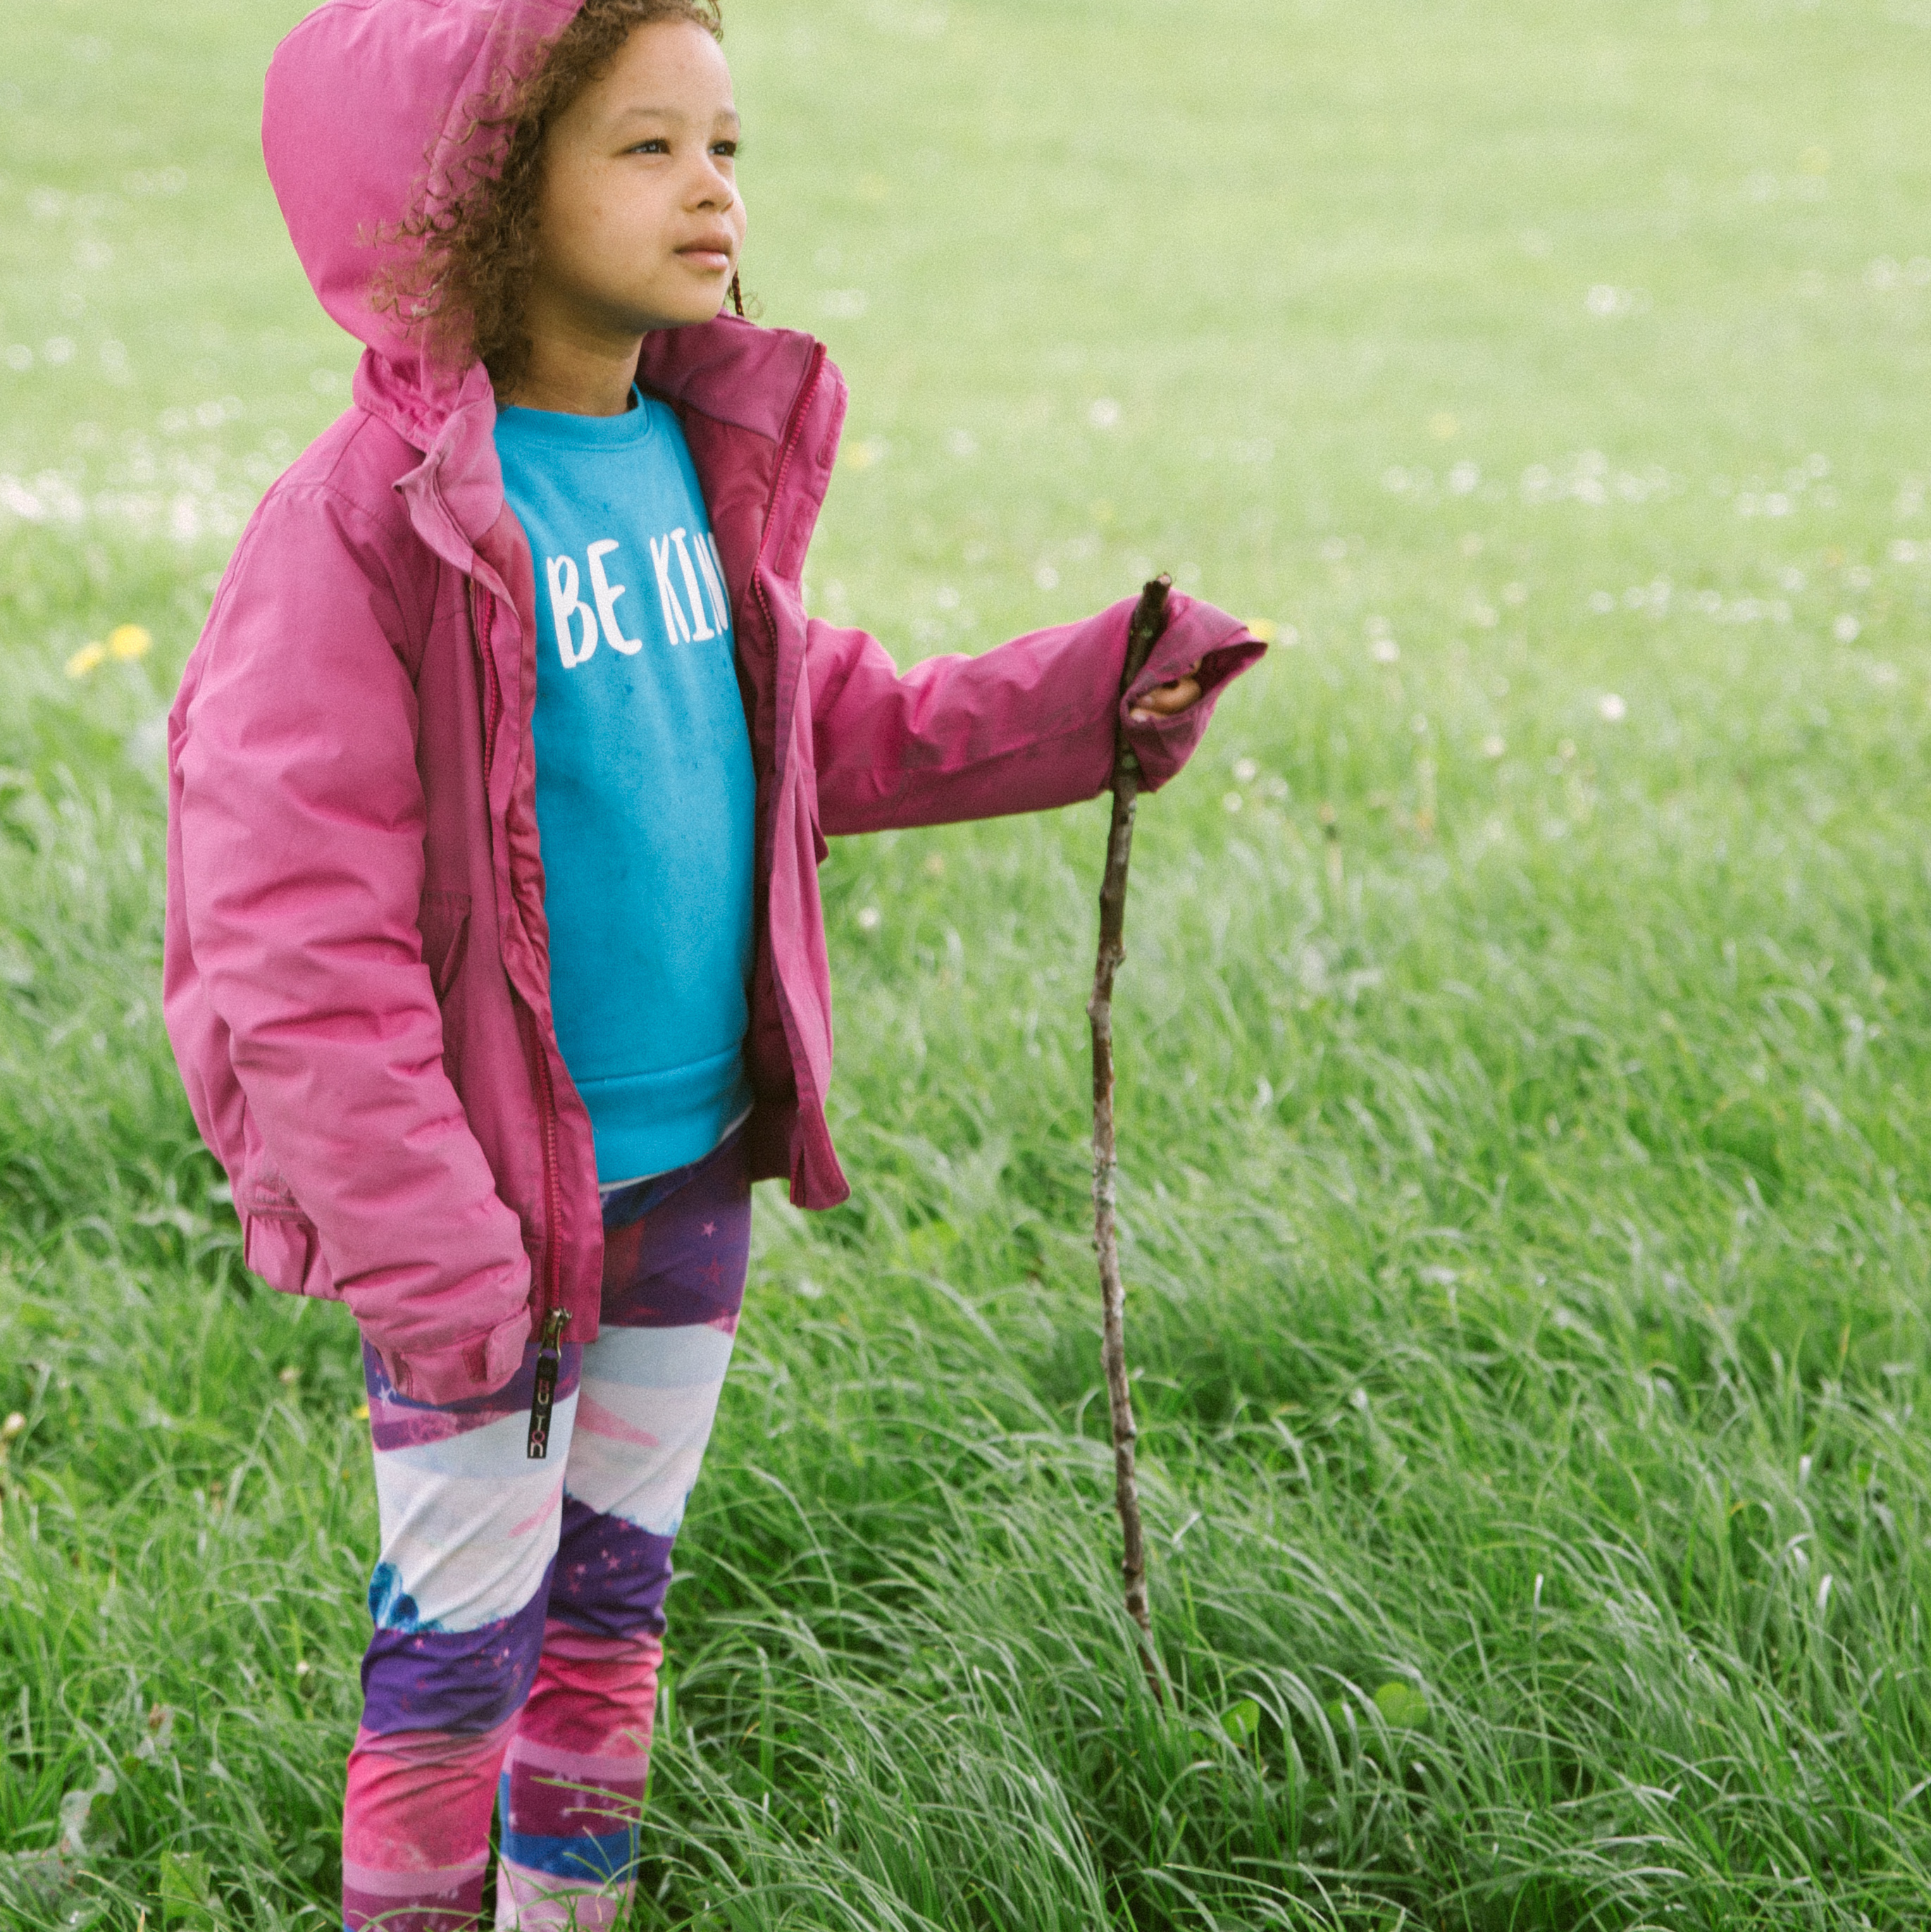 A photo of a young child standing on some grass, she is wearing a pink coat with the hood up and is looking off towards the right.